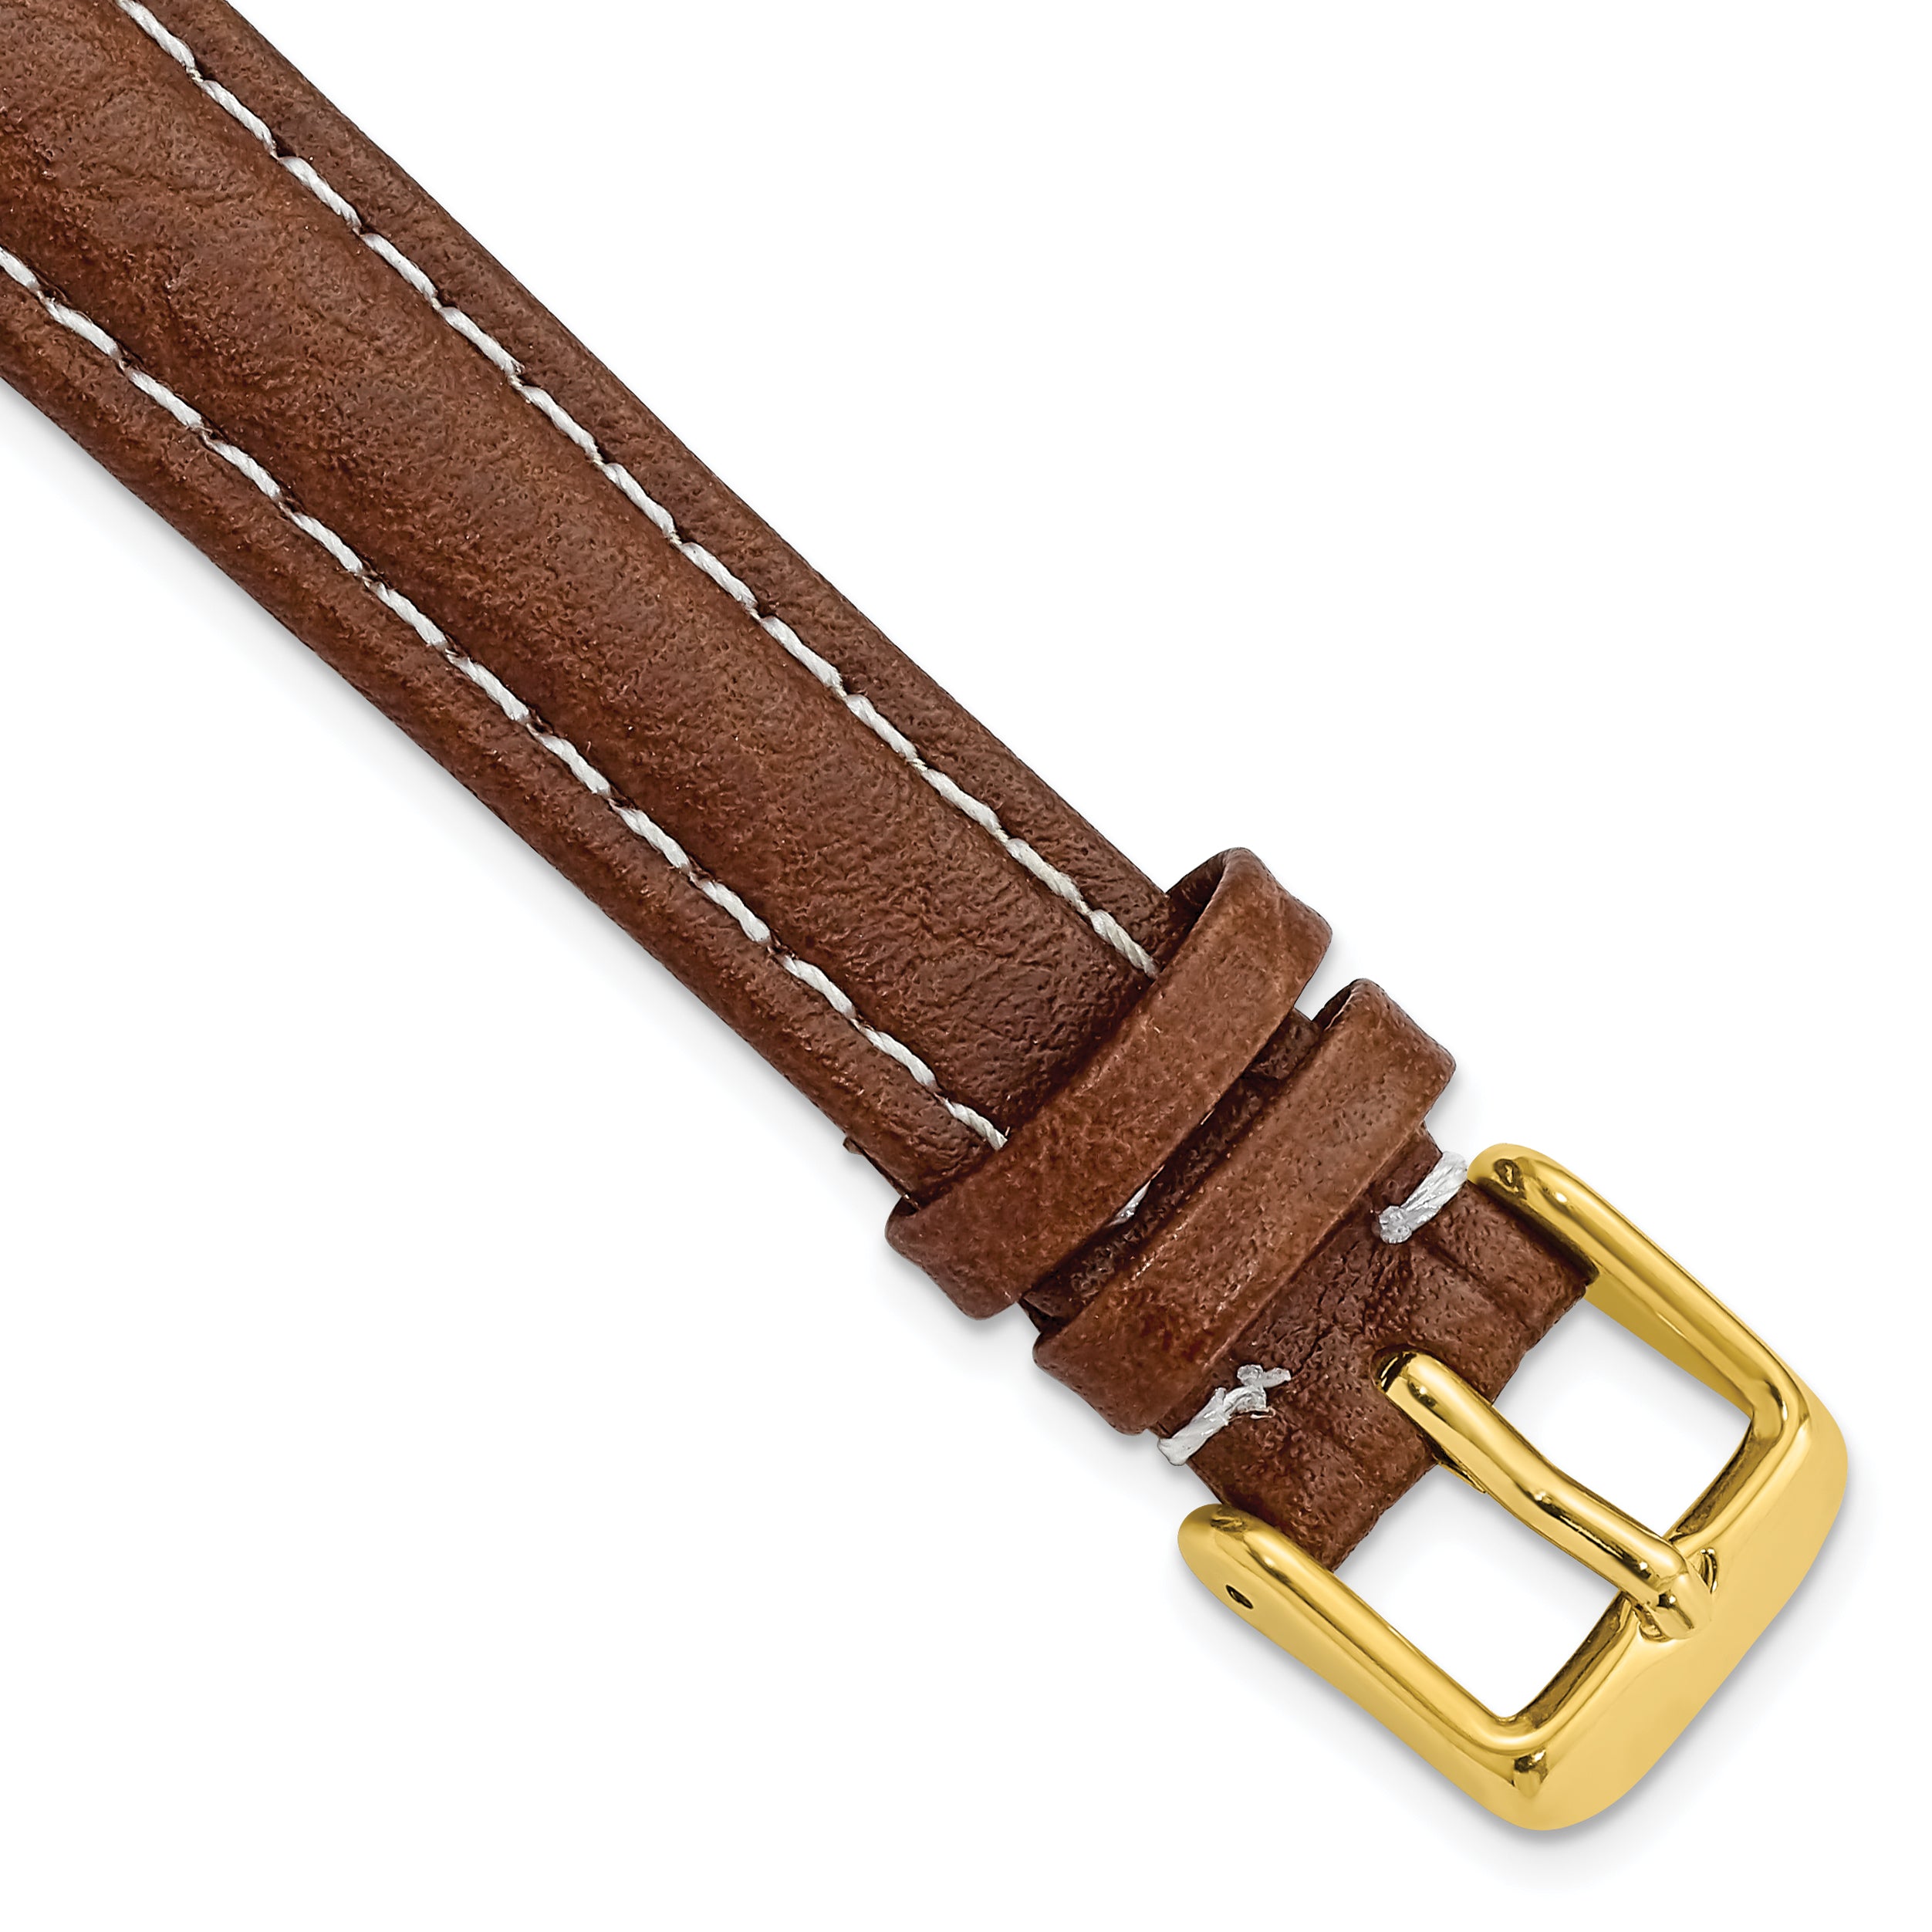 DeBeer 14mm Havana Sport Leather with White Stitching and Gold-tone Buckle 6.75 inch Watch Band